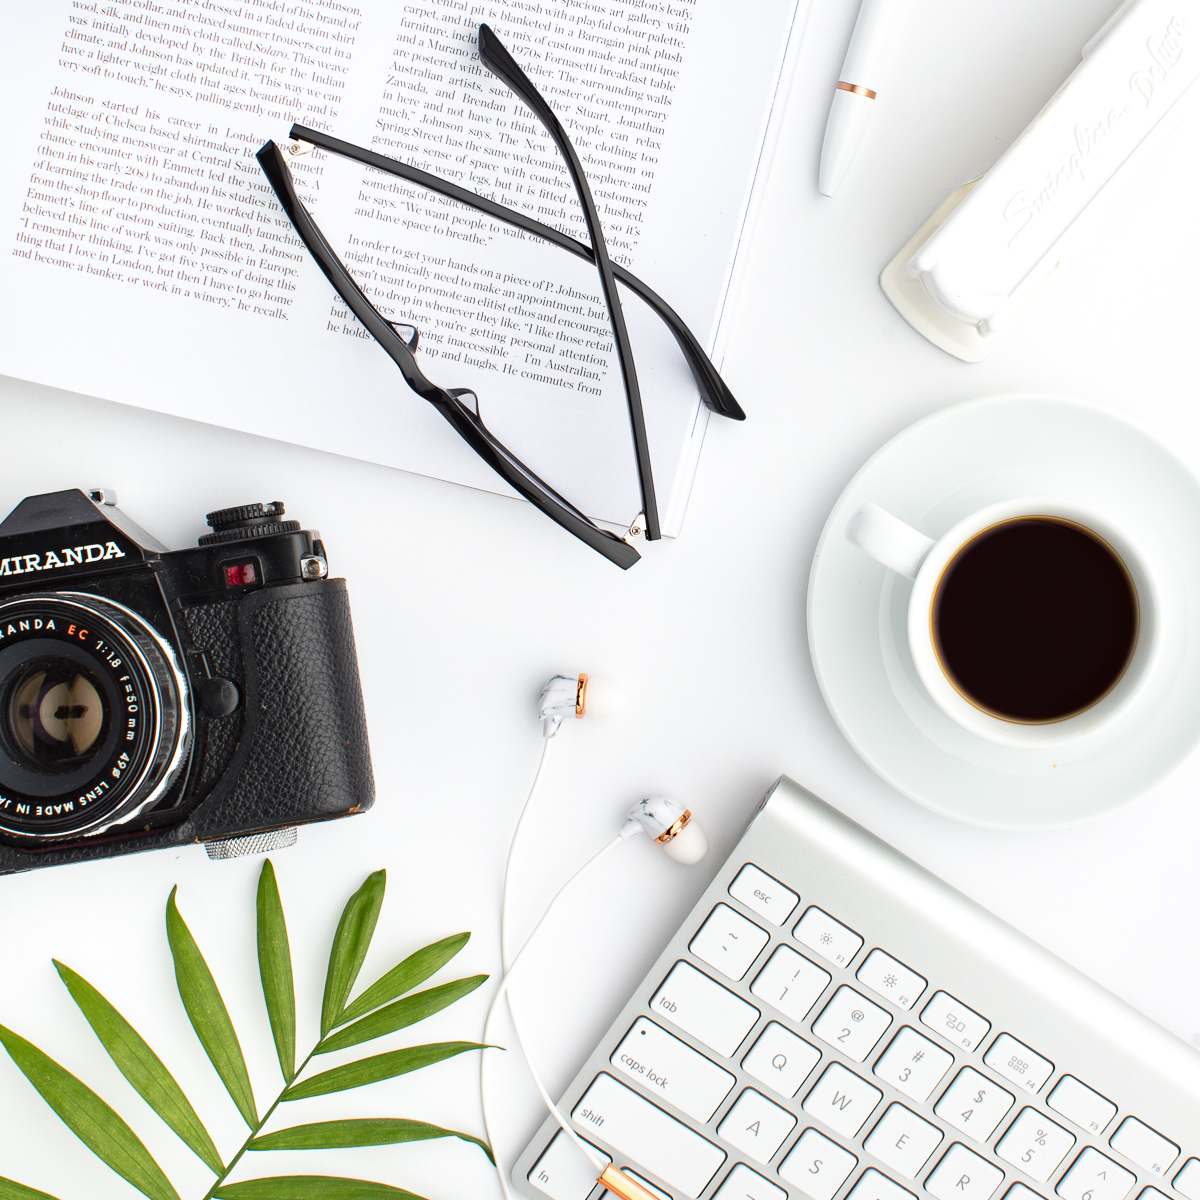 Styled Stock Photos for Instagram and Social Media, Flatlays, Social Squares from the SC Stockshop / Camera, keyboard, and coffee